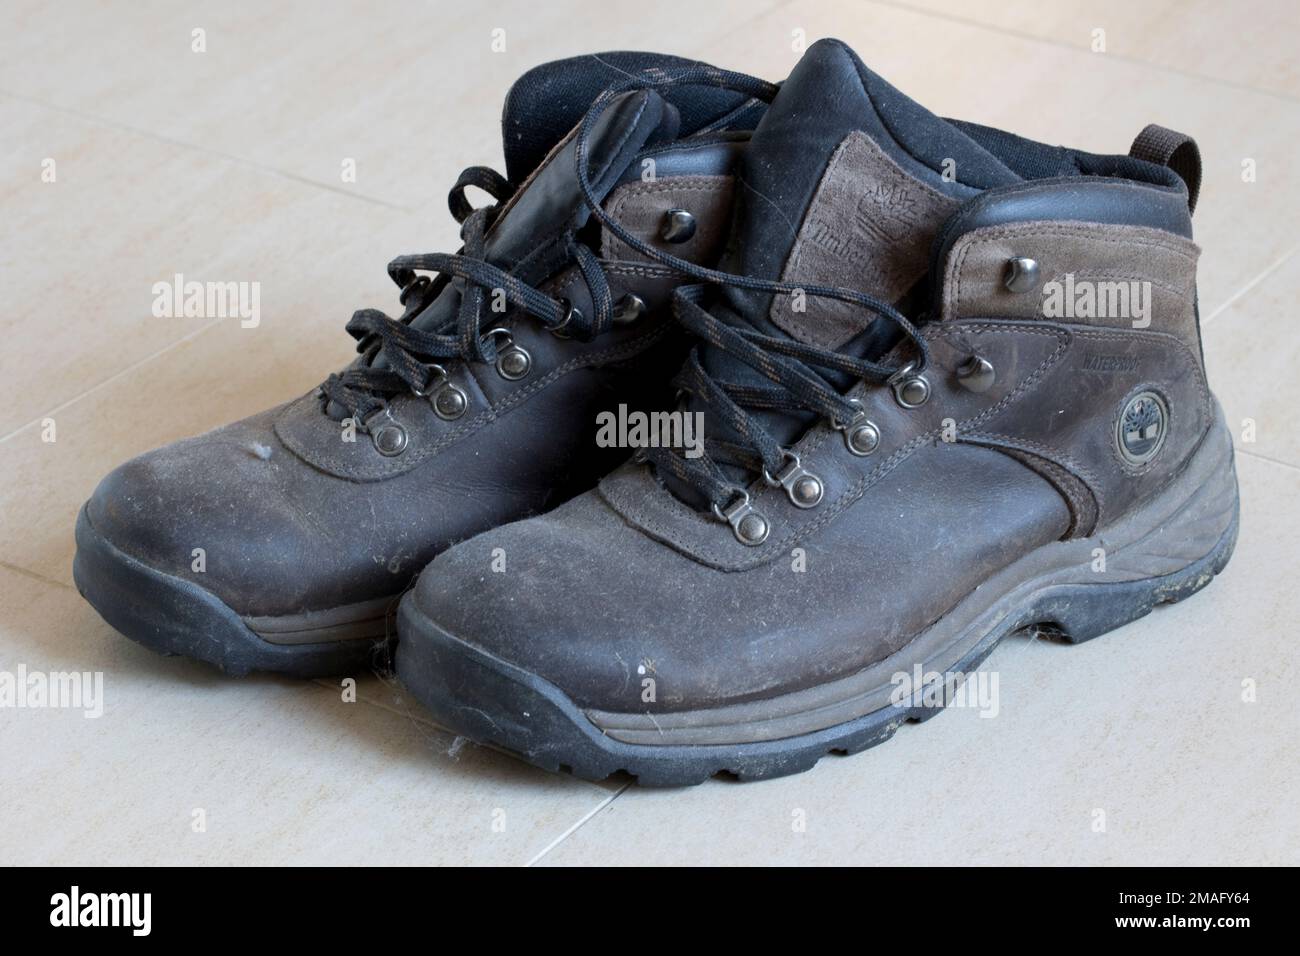 Pair of leather men's walking boots UK Stock Photo